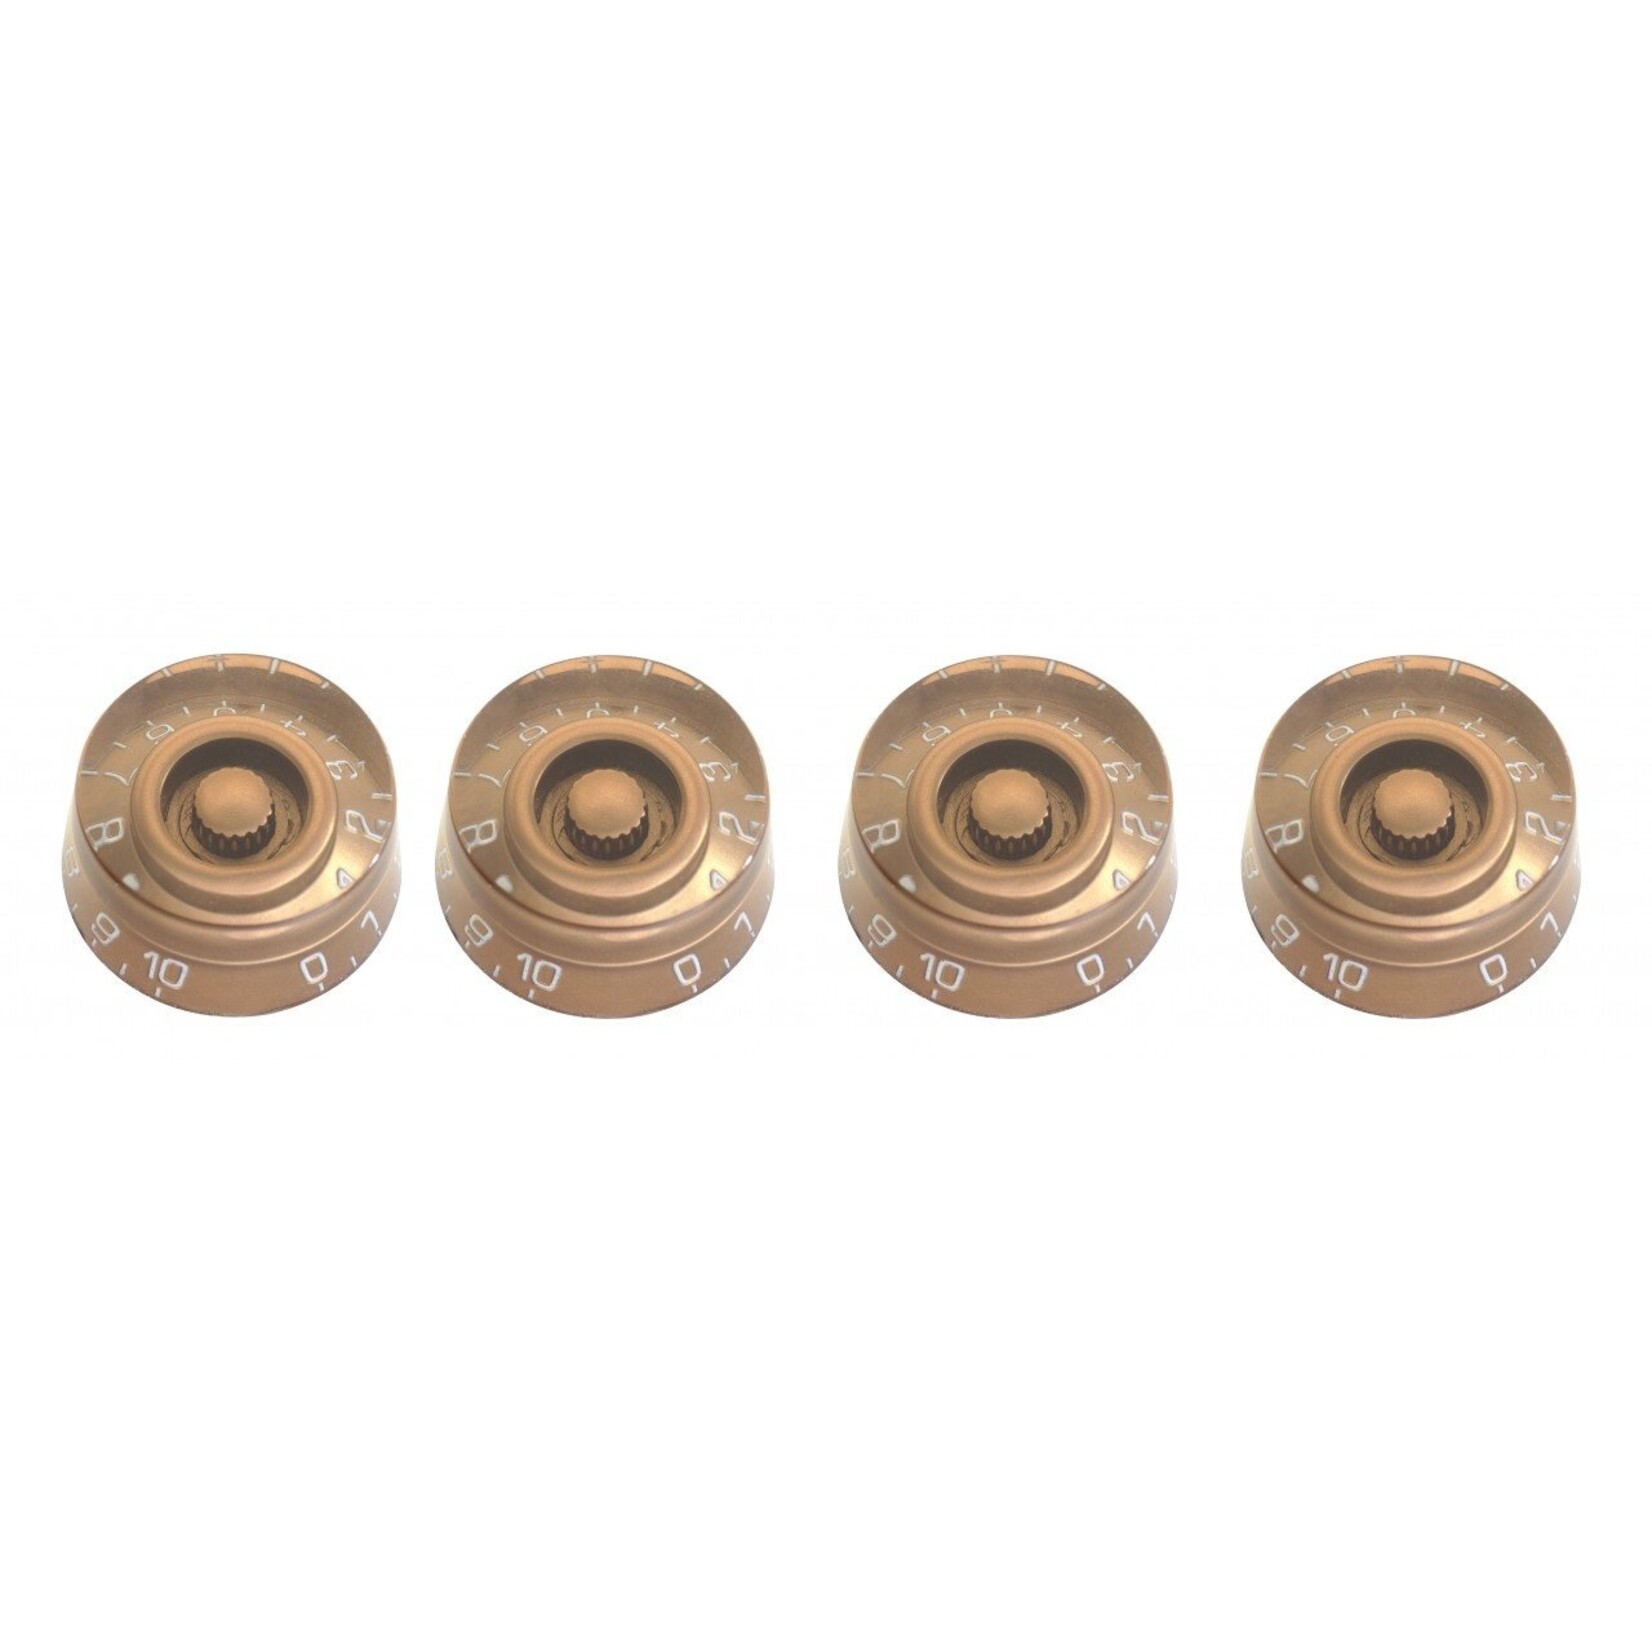 Stagg Electric Guitar Speed Knobs-Gold